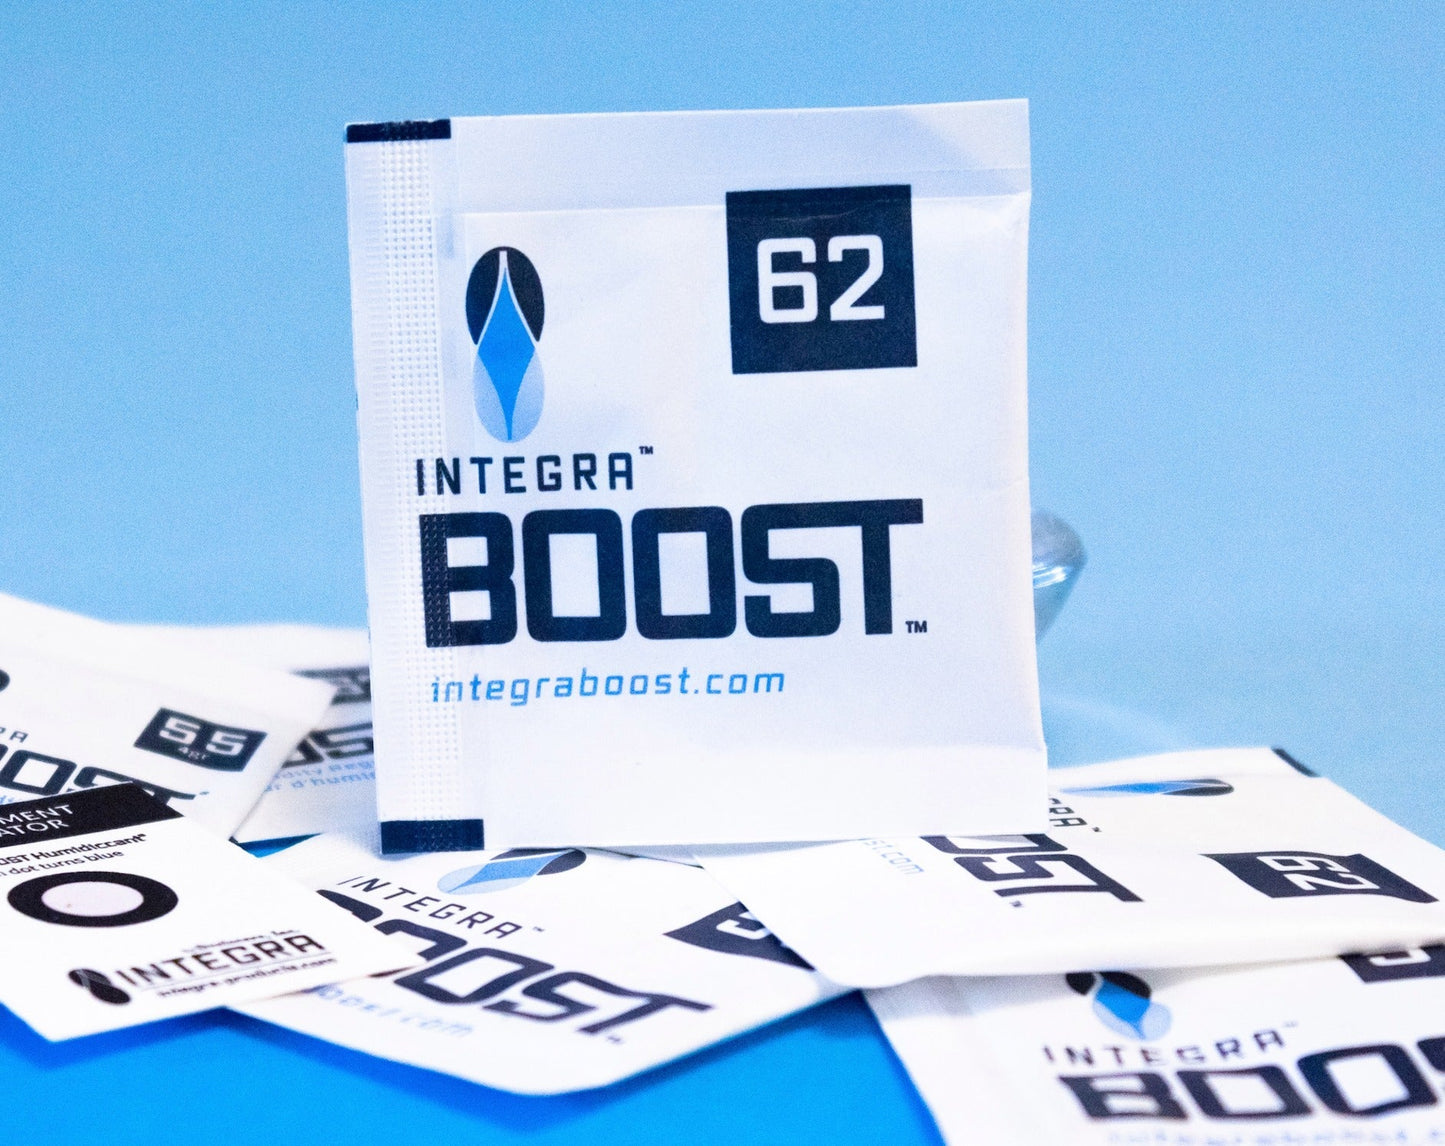 Integra Boost® 4 Gram 62% rH Humidity Control Packets are salt-free, spill-proof and FDA-complaint so you can safely and confidently place Integra BOOST® packs directly inside a container or jar to absorb and/or provide excess moisture as needed